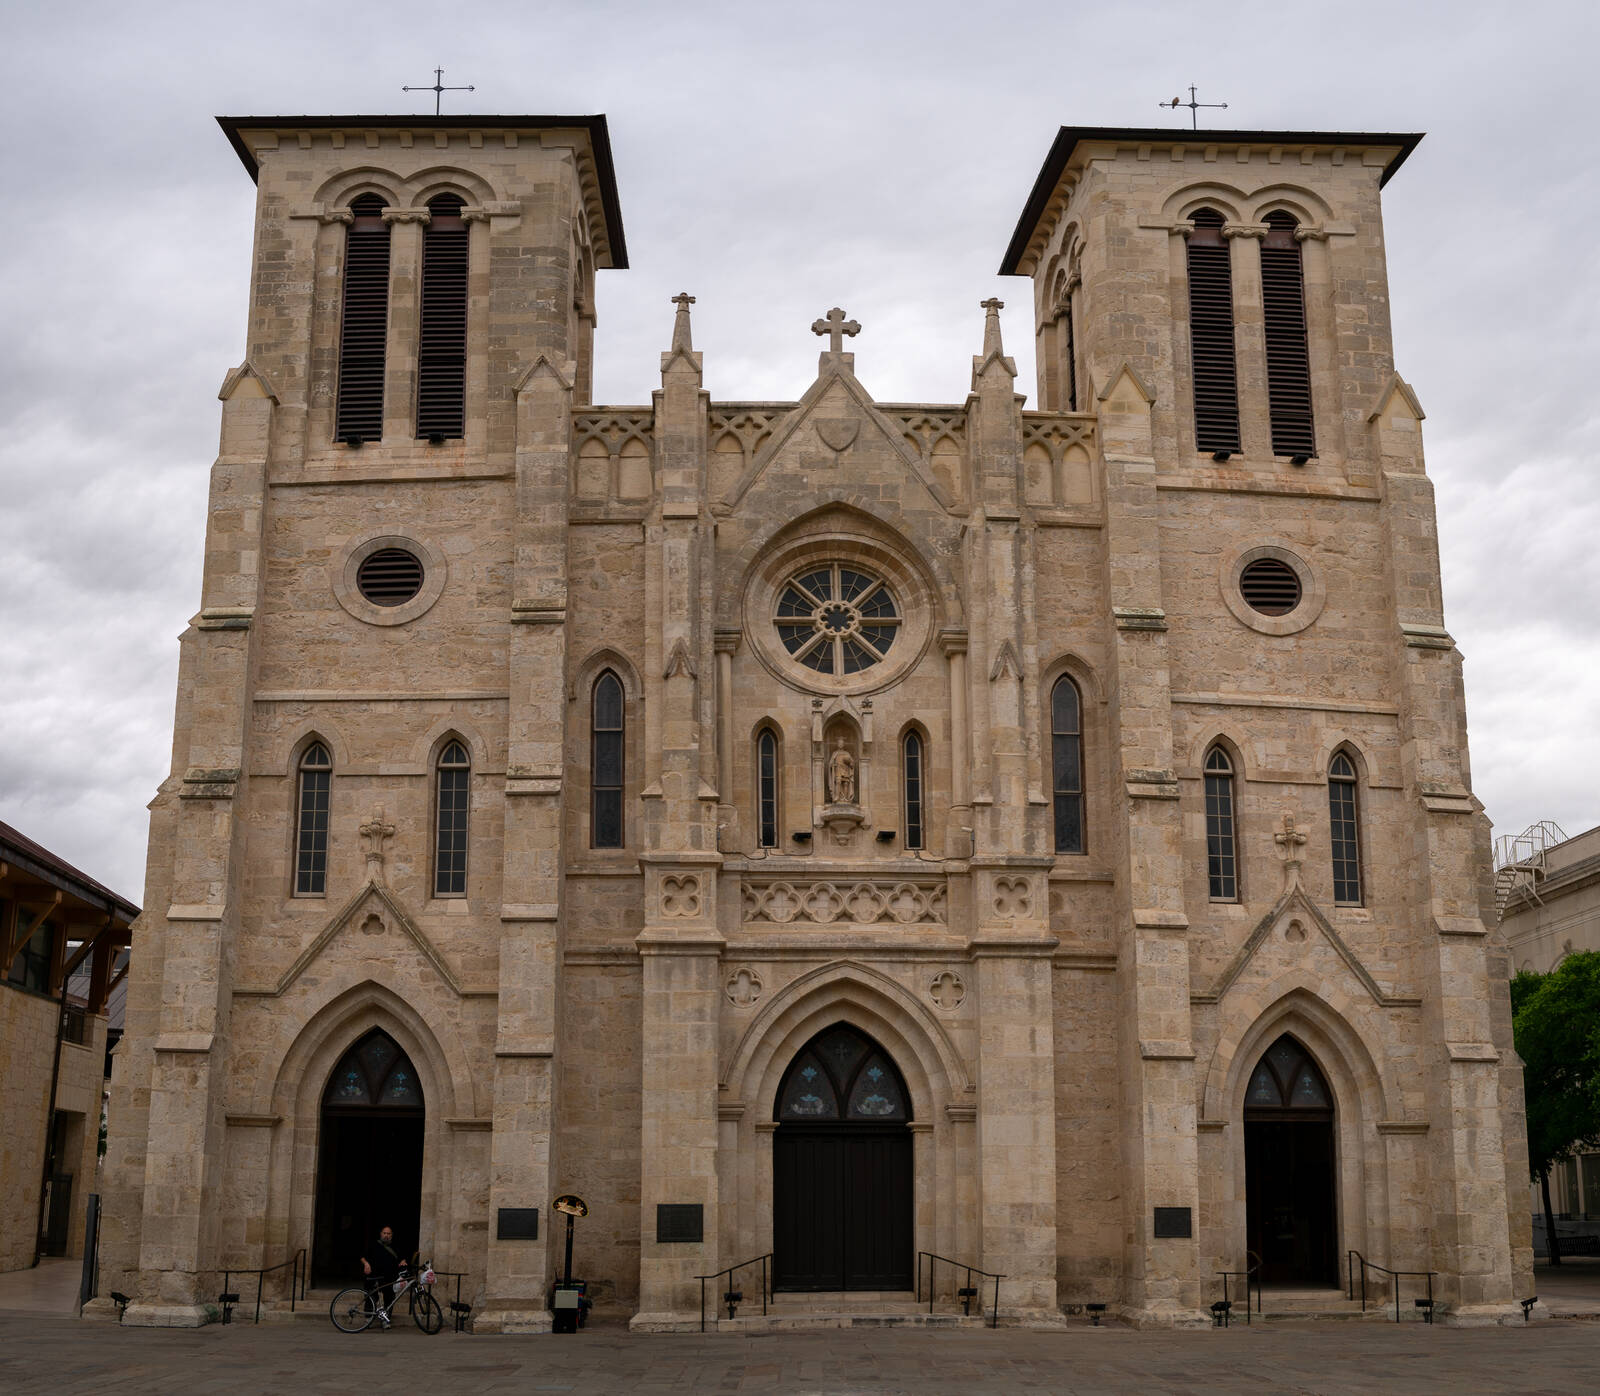 Image of San Fernando Cathedral by James Billings.